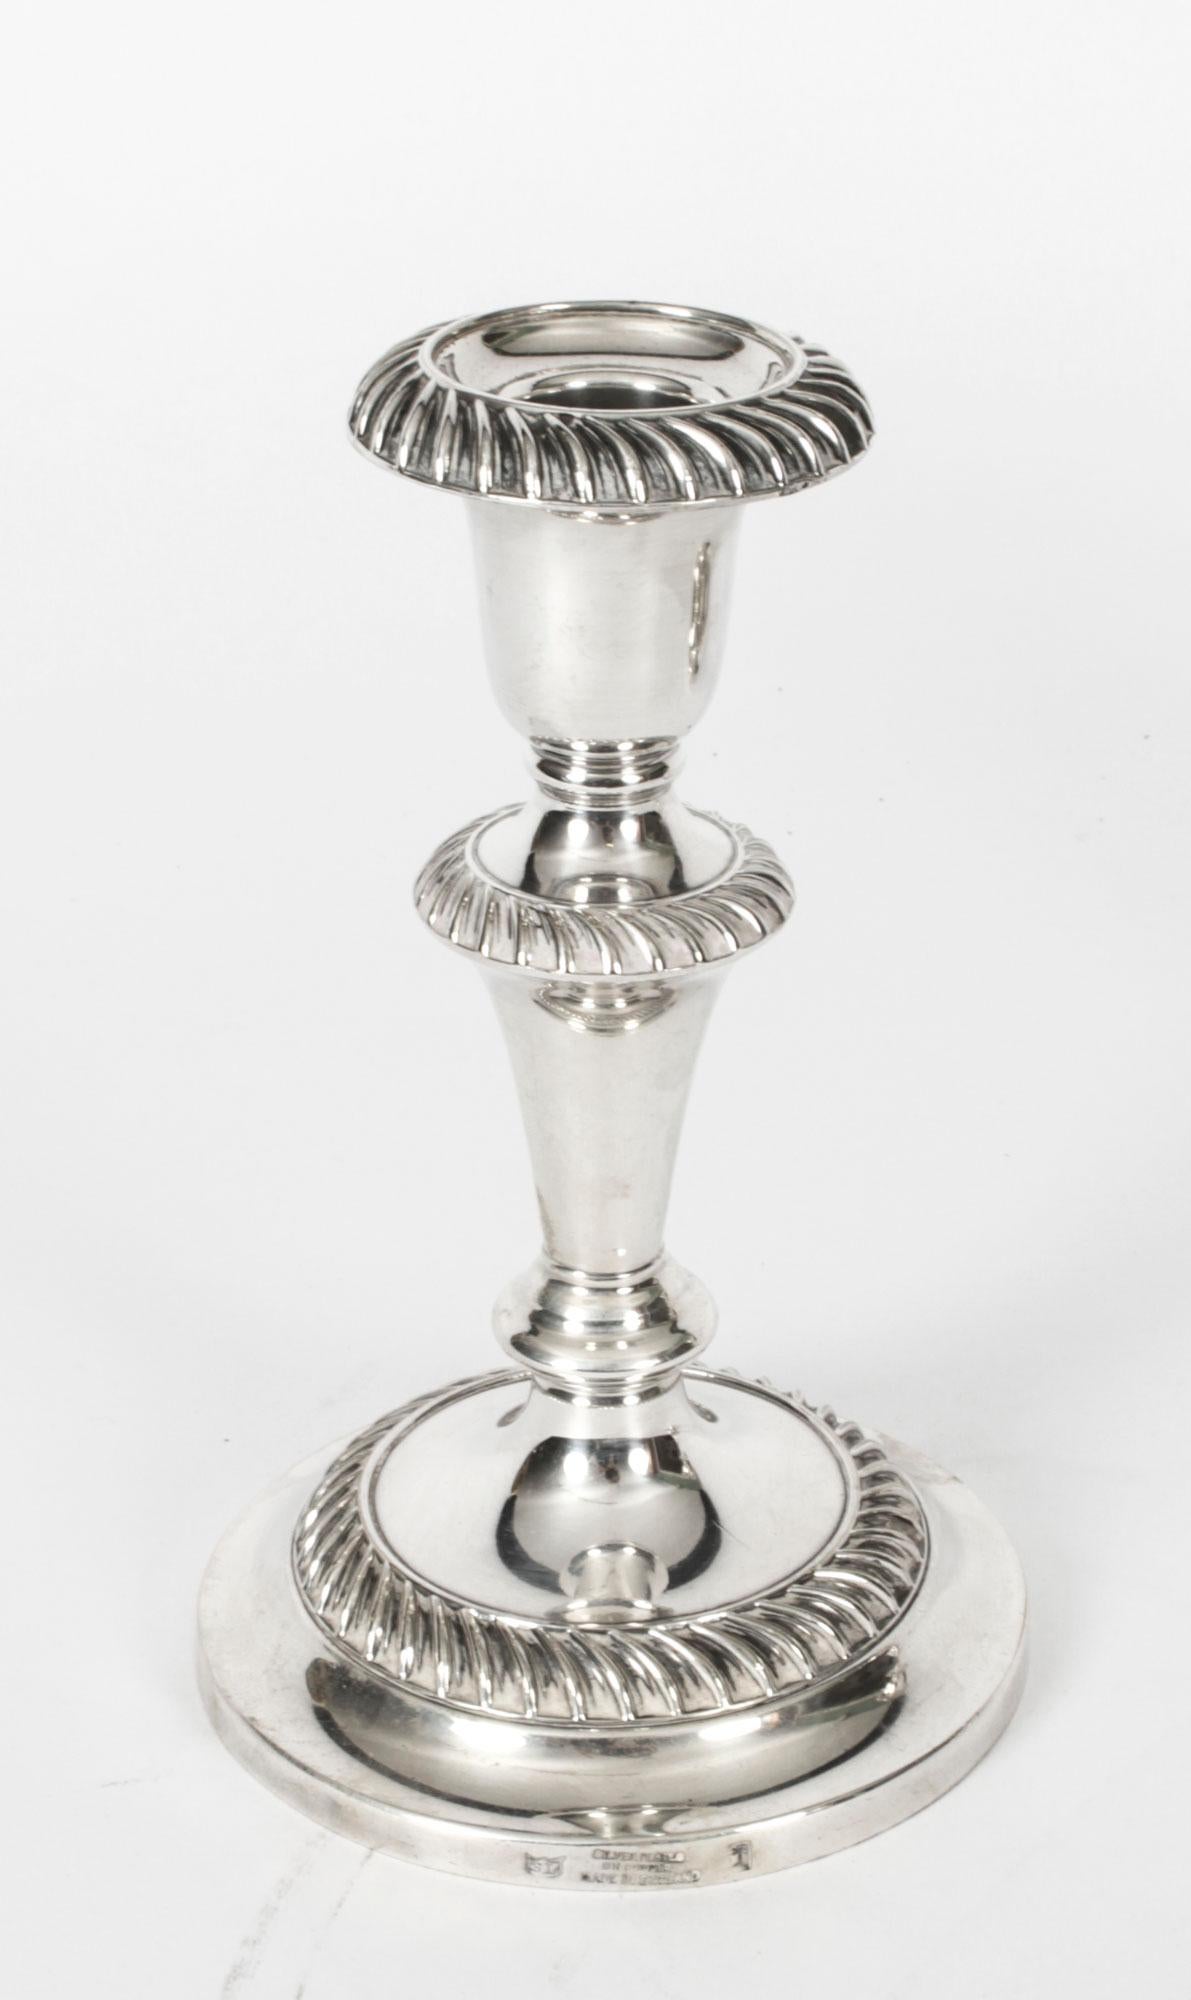 British Antique Pair Silver Plate Candlesticks by Sydney Latimer, Early 20th Century